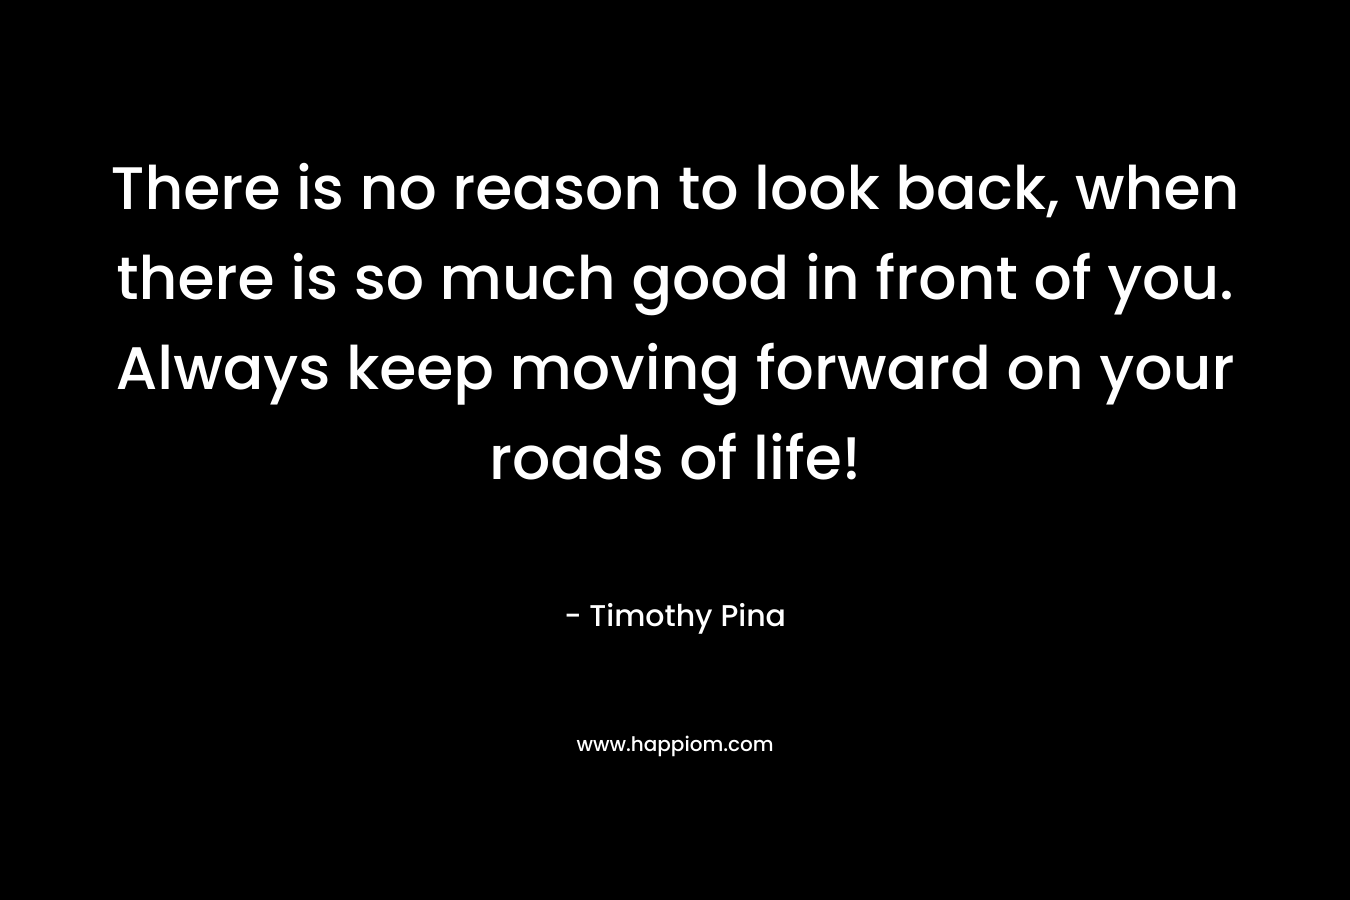 There is no reason to look back, when there is so much good in front of you. Always keep moving forward on your roads of life!